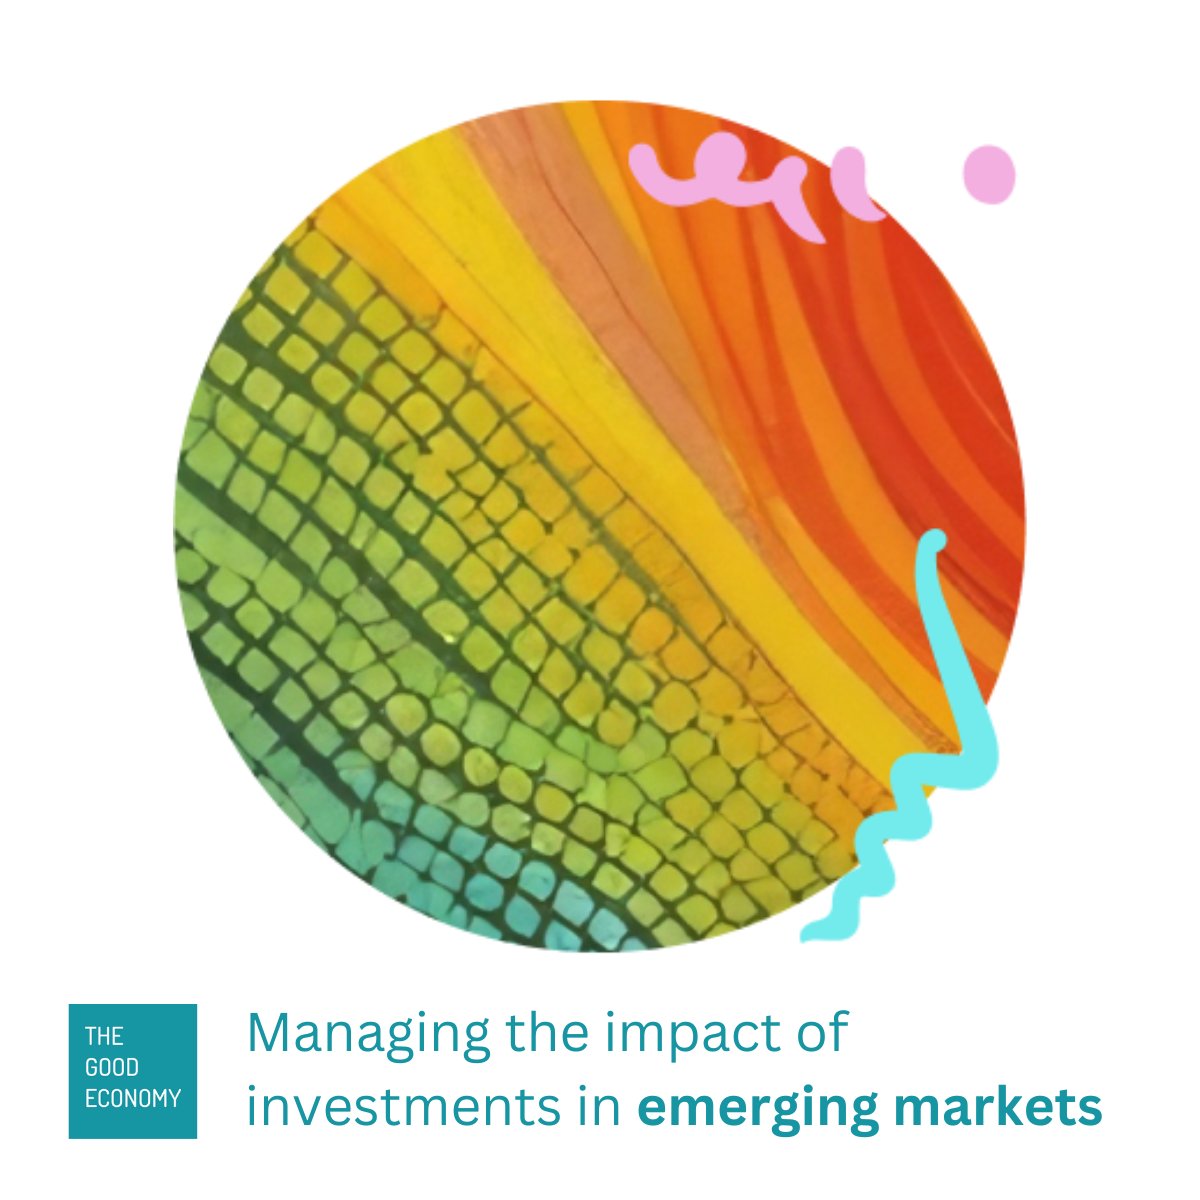 Did you know we are a trusted partner for investors developing and delivering #ImpactStrategies in #EmergingMarkets? 

We focus on #ImpactManagement for investments in #DecentJobs, #healthcare, #FinancialInclusion and #PlaceBased impacts. 

Case studies ➡️ thegoodeconomy.co.uk/specialisation…